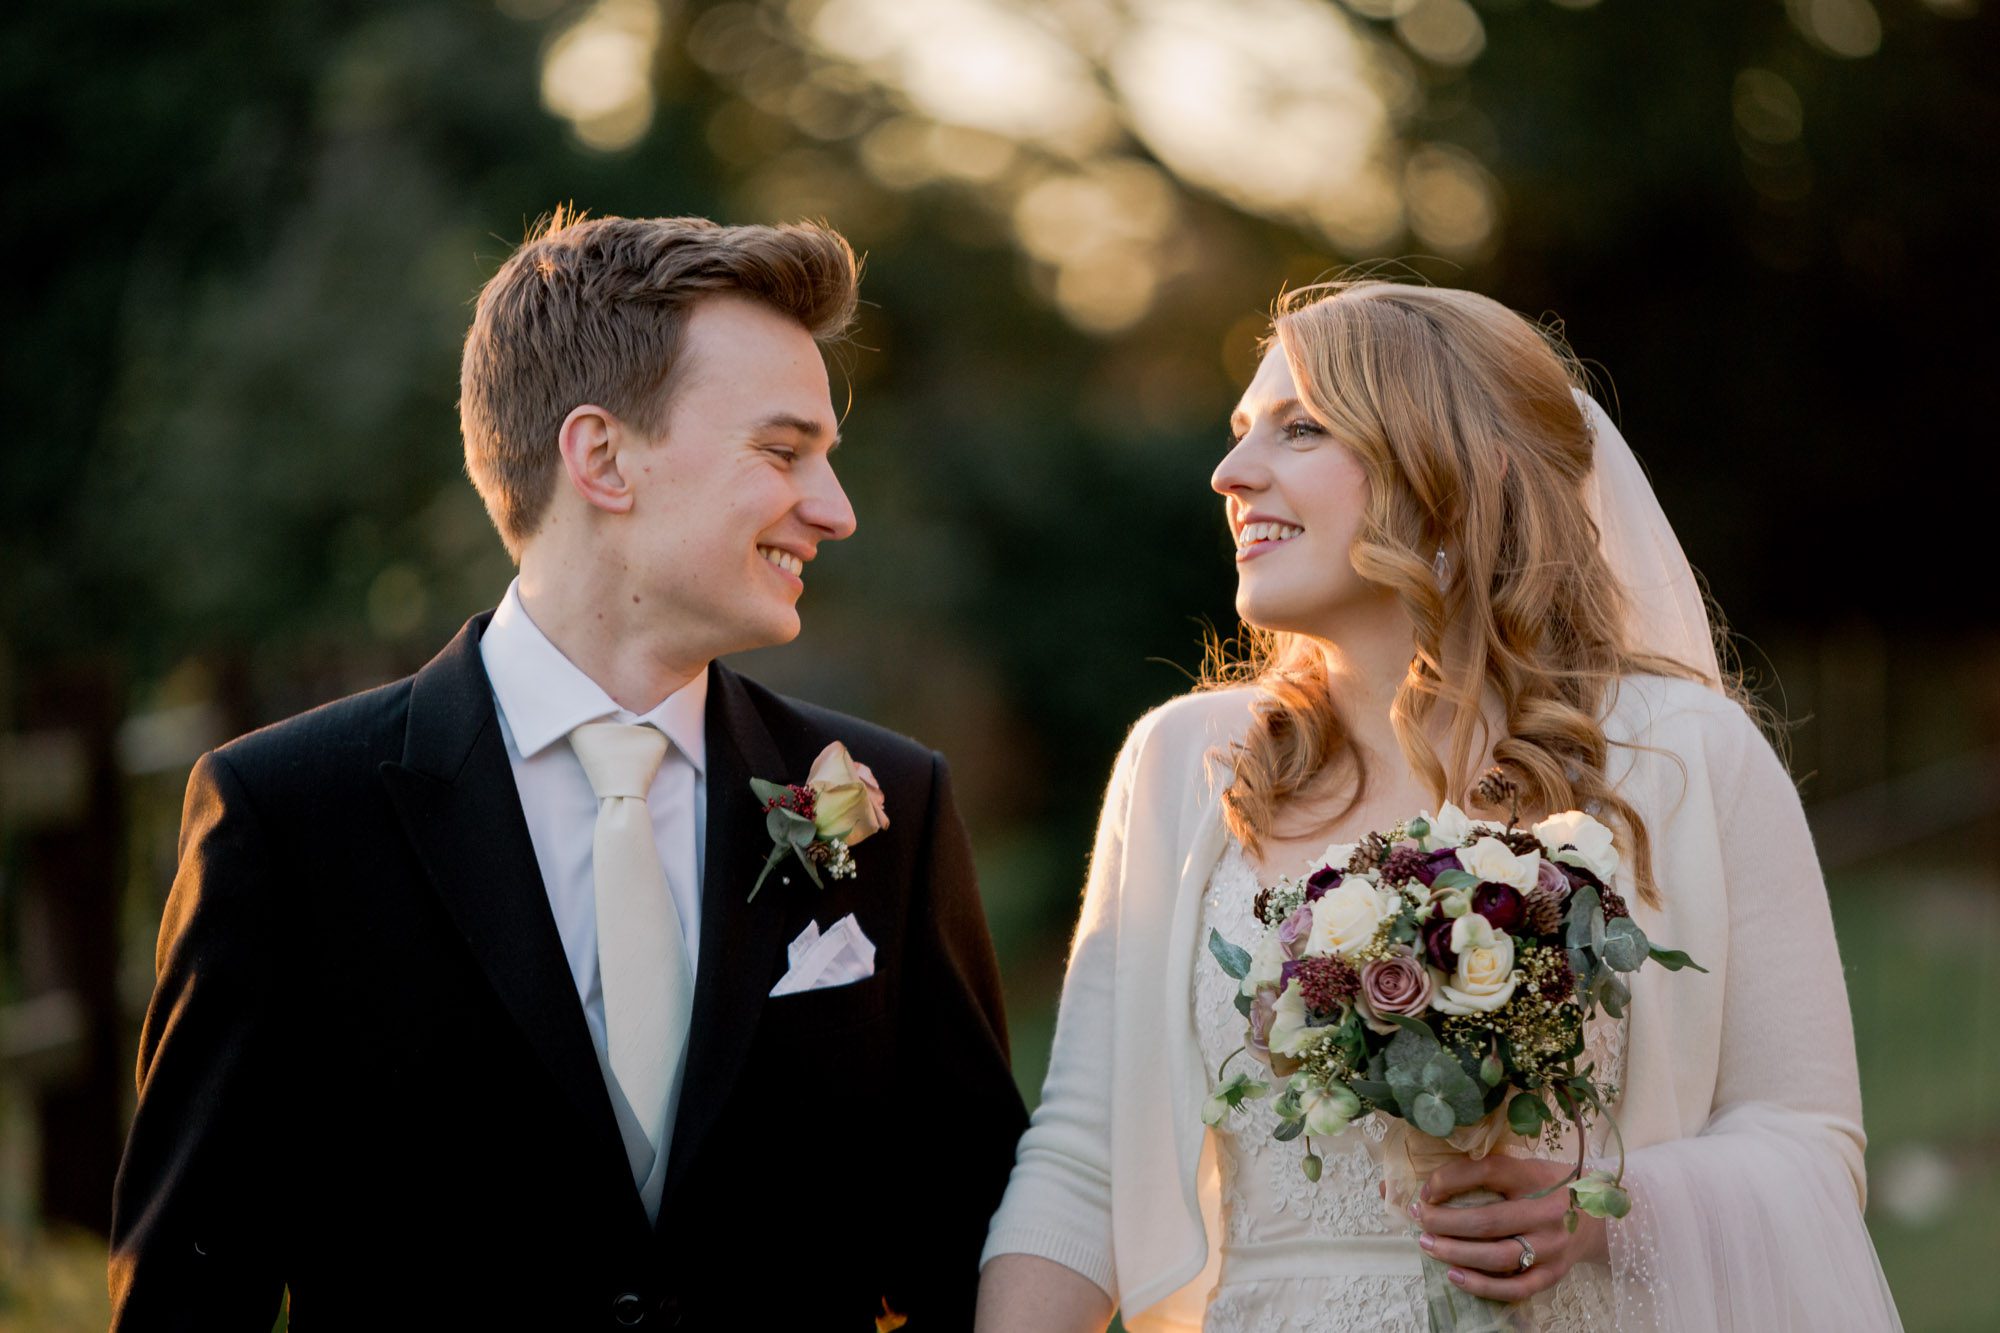 Bride and groom smiling whilst they take a stroll on their wedding day at Nutfield Priory Wedding Venue in Surrey.